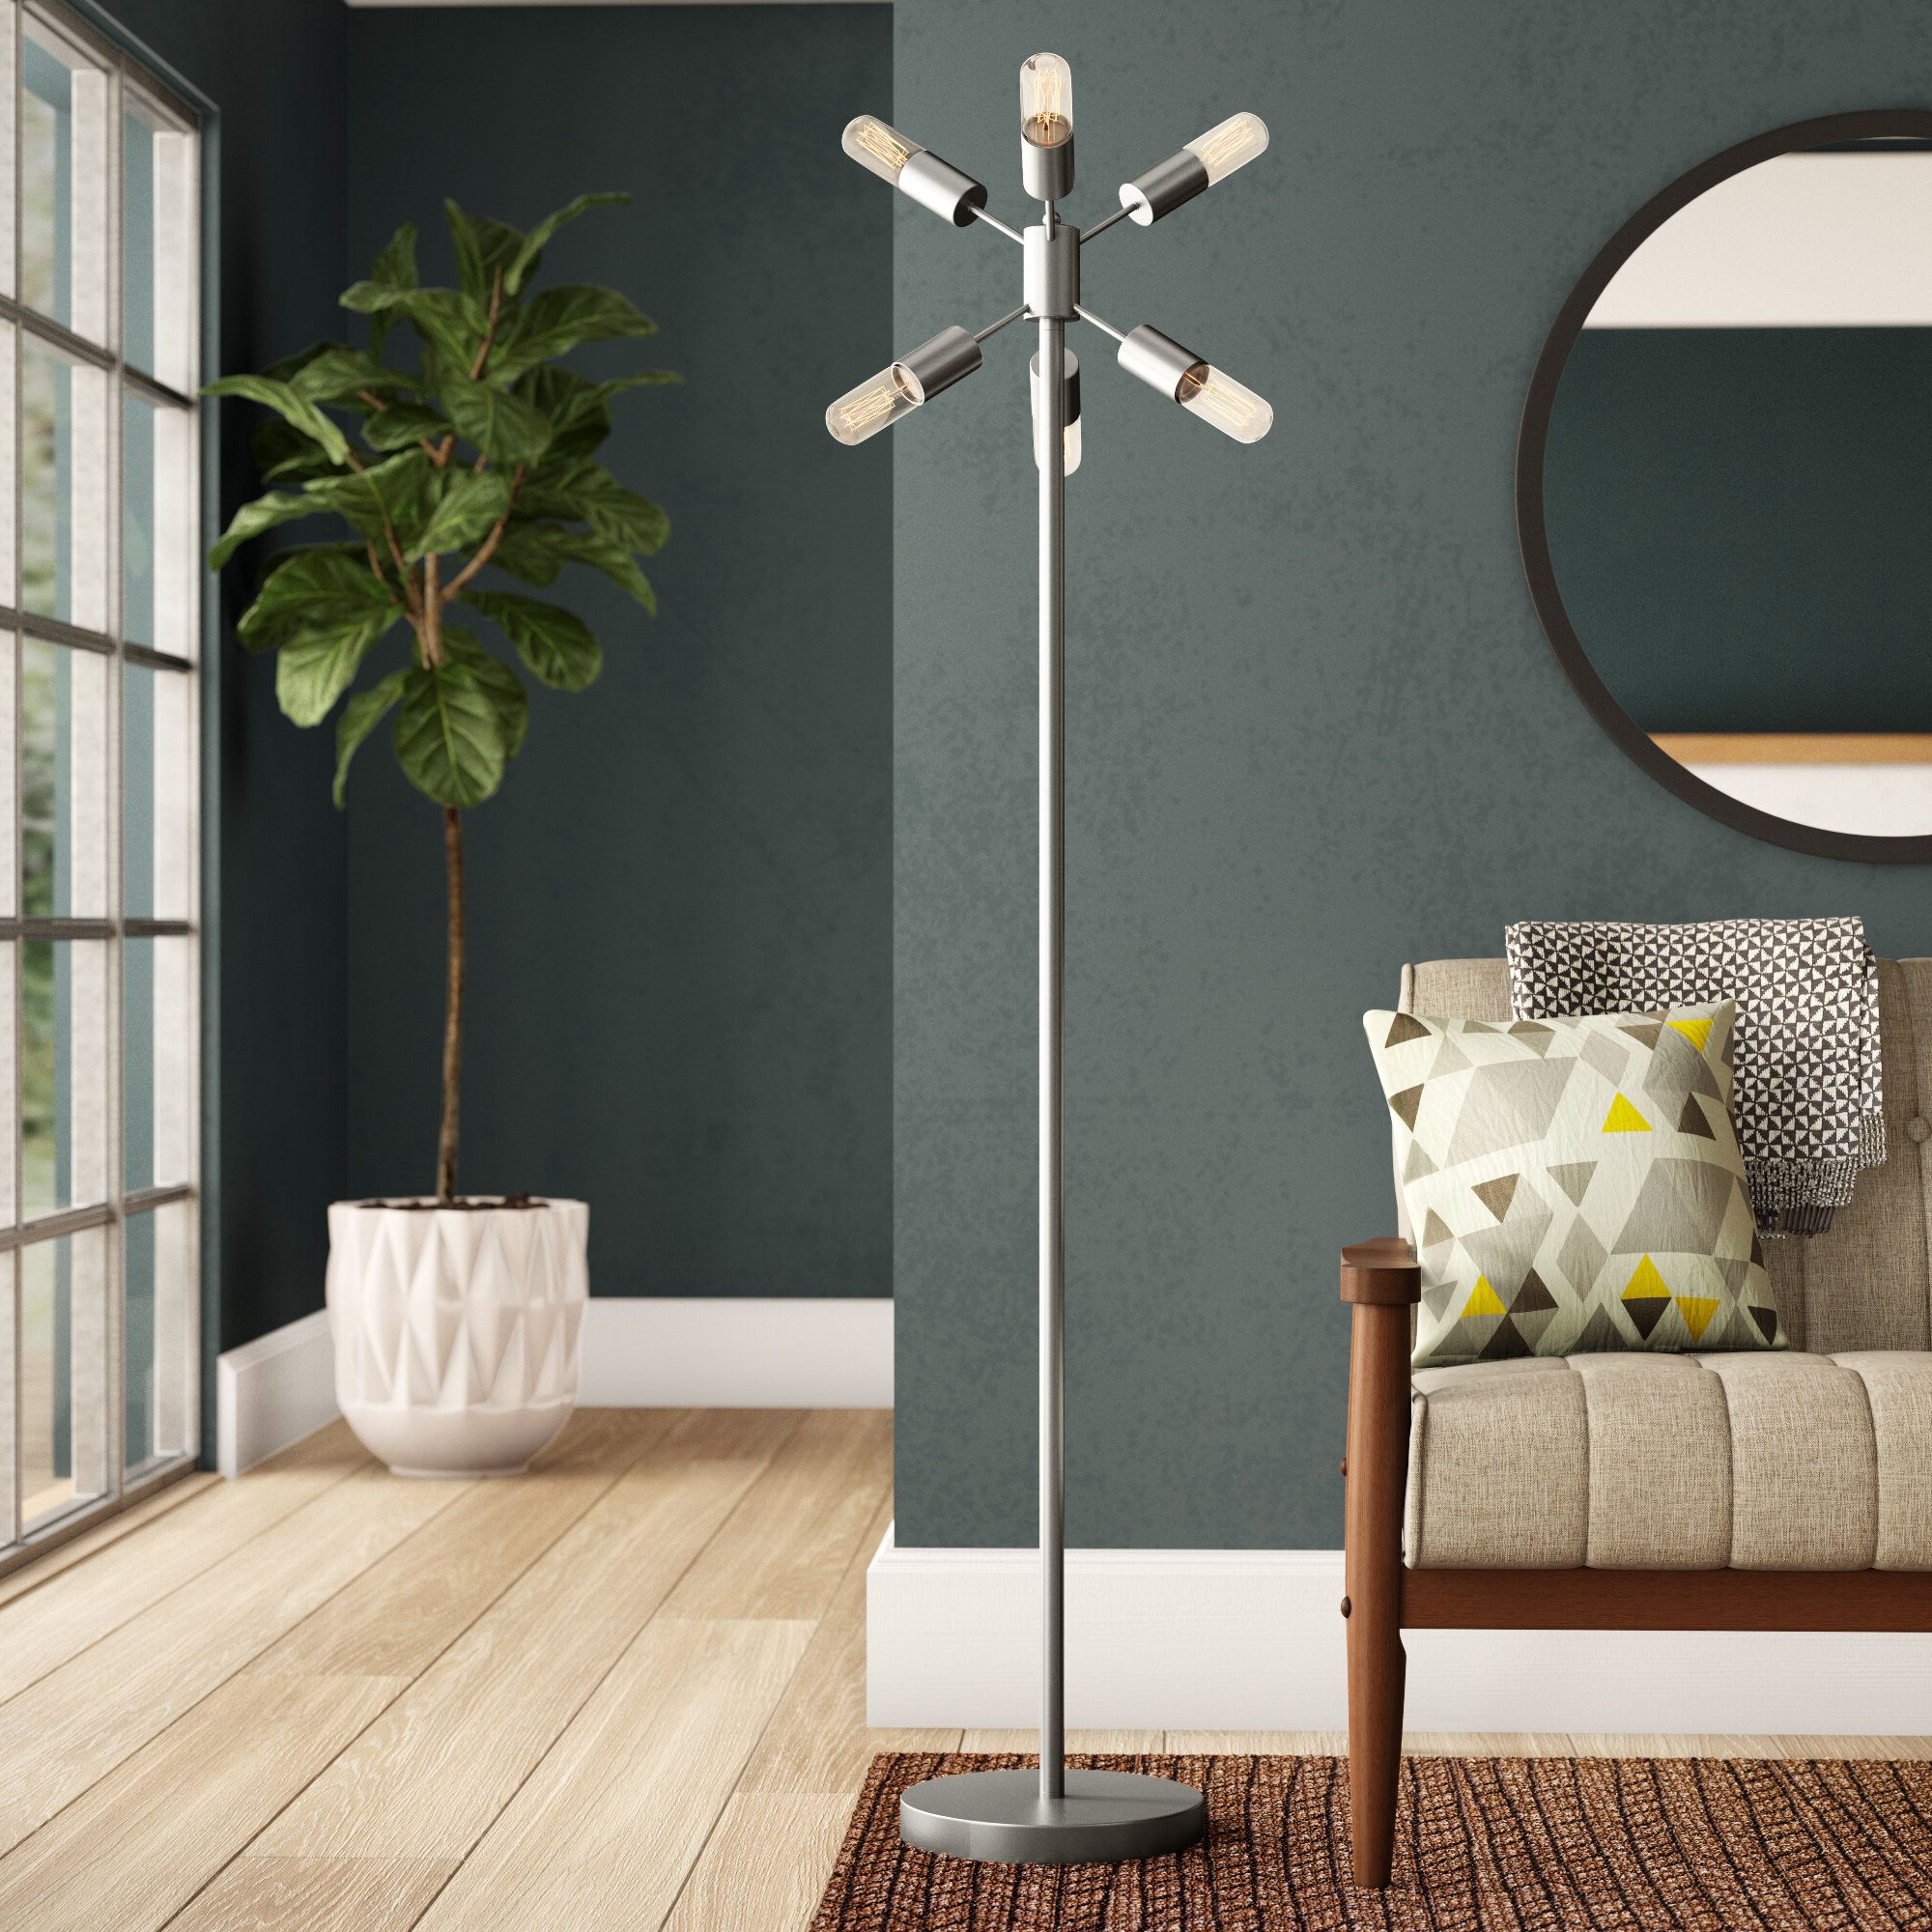 Stainless Steel Floor Lamps You'll Love In 2023 Pertaining To Recent Stainless Steel Floor Lamps (View 14 of 15)